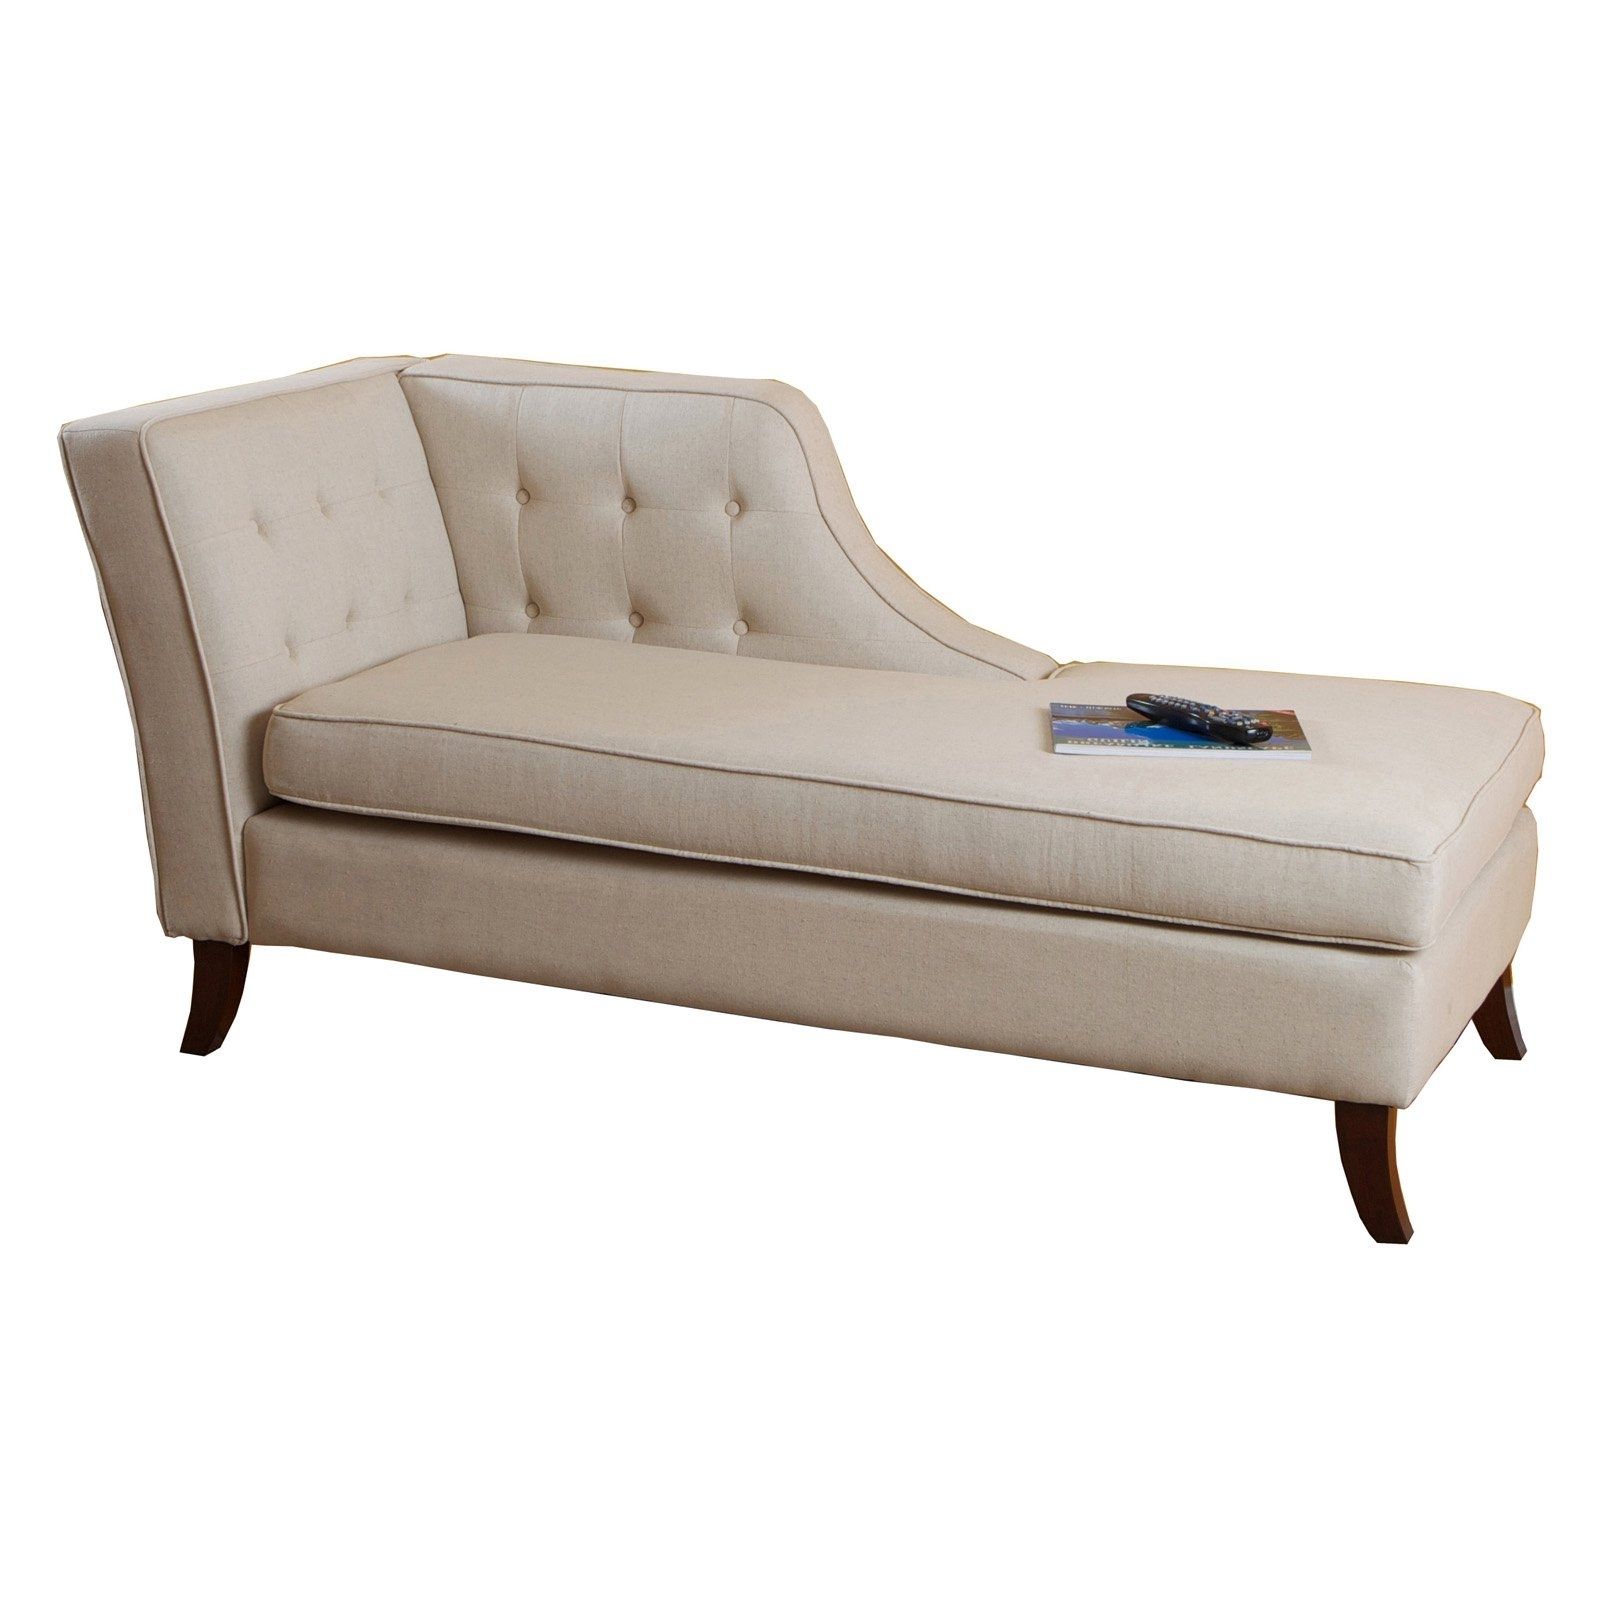 Really Awesome And Comfort Cushions Tufted Chaise Lounge With Preferred Comfortable Chaise Lounges (View 8 of 15)